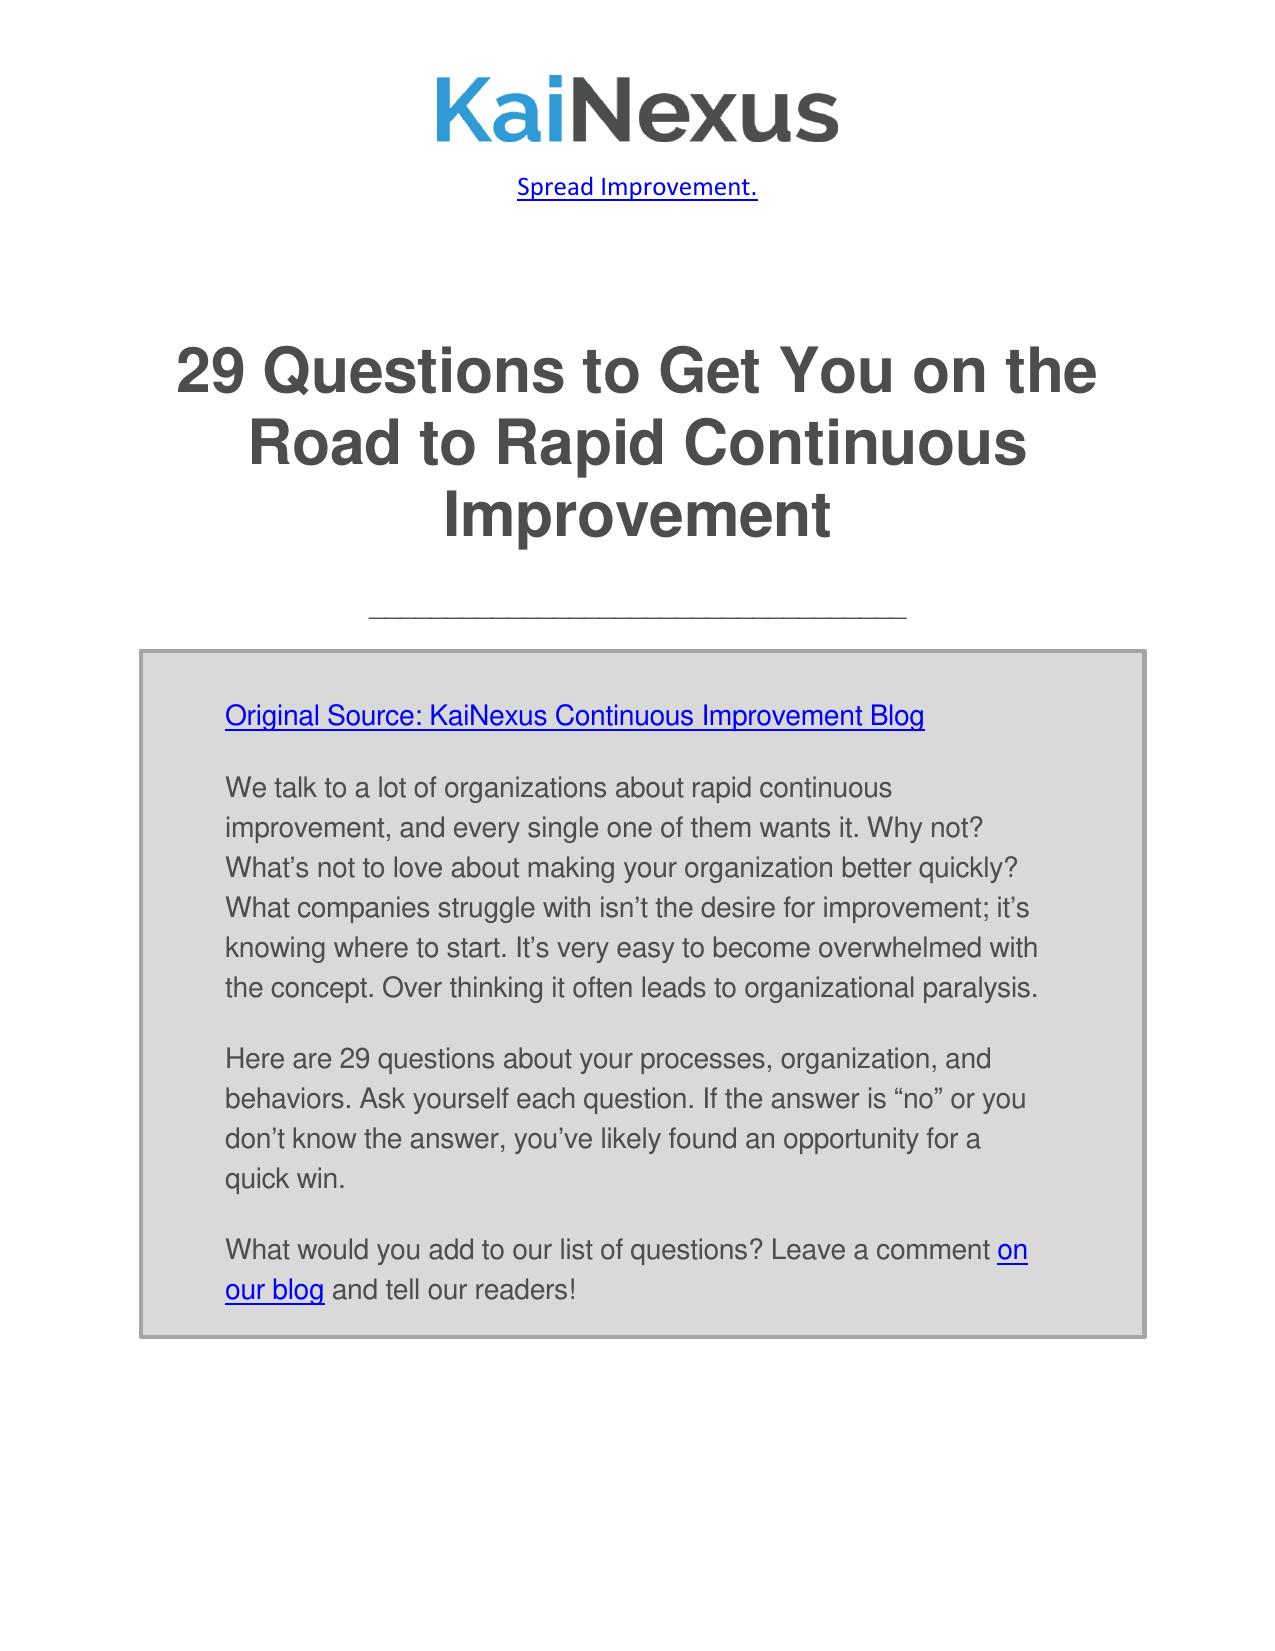 29 Questions to Get You on the Road to Rapid Continuous Improvement